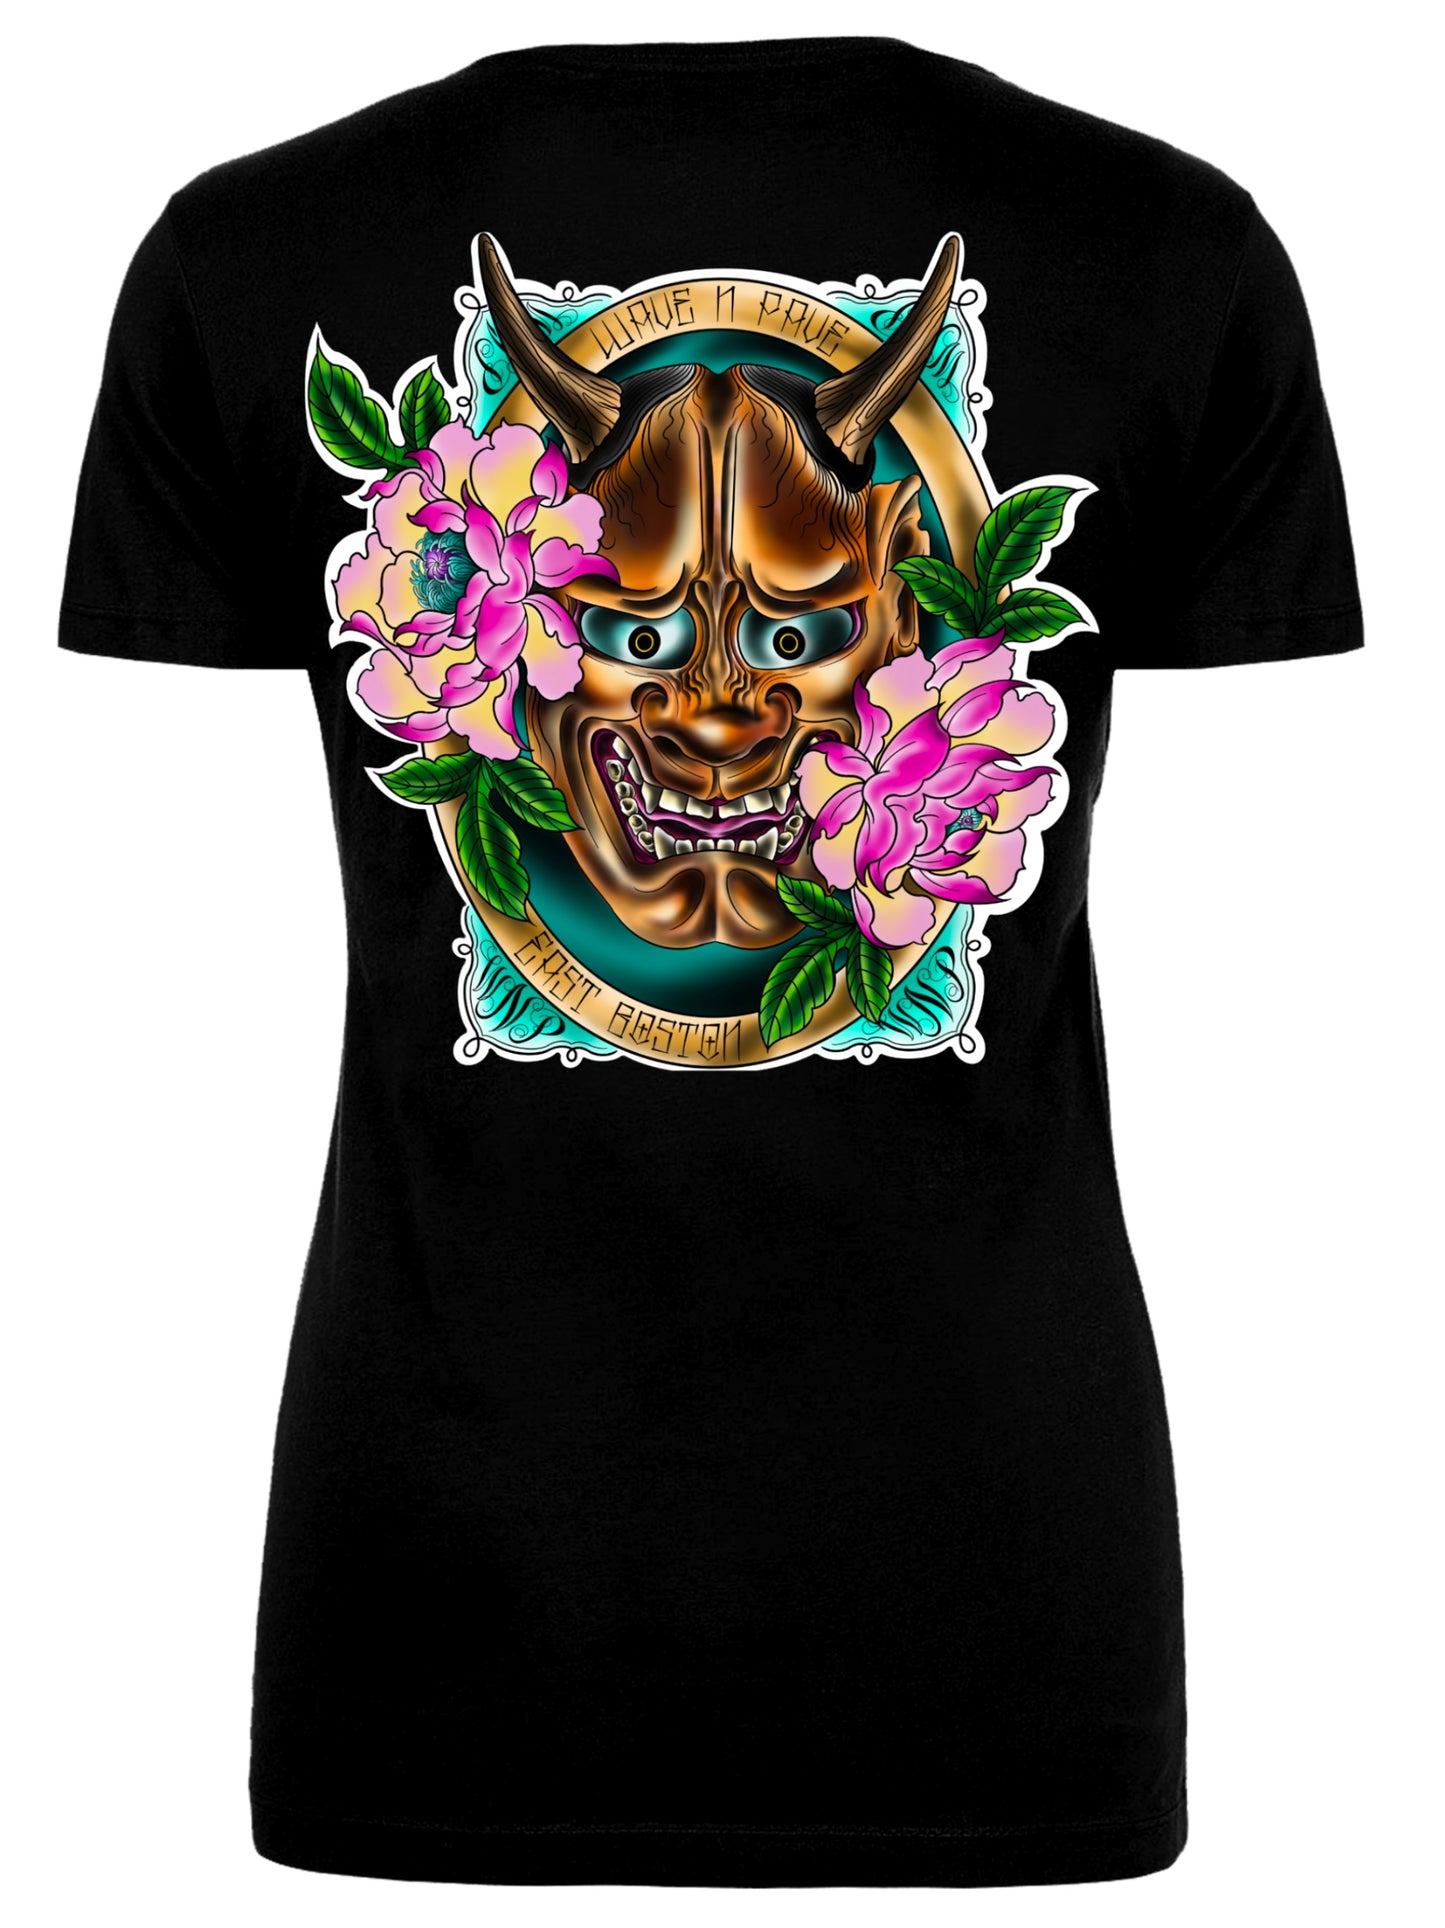 Hannya Woman’s Fitted V-Neck Tee